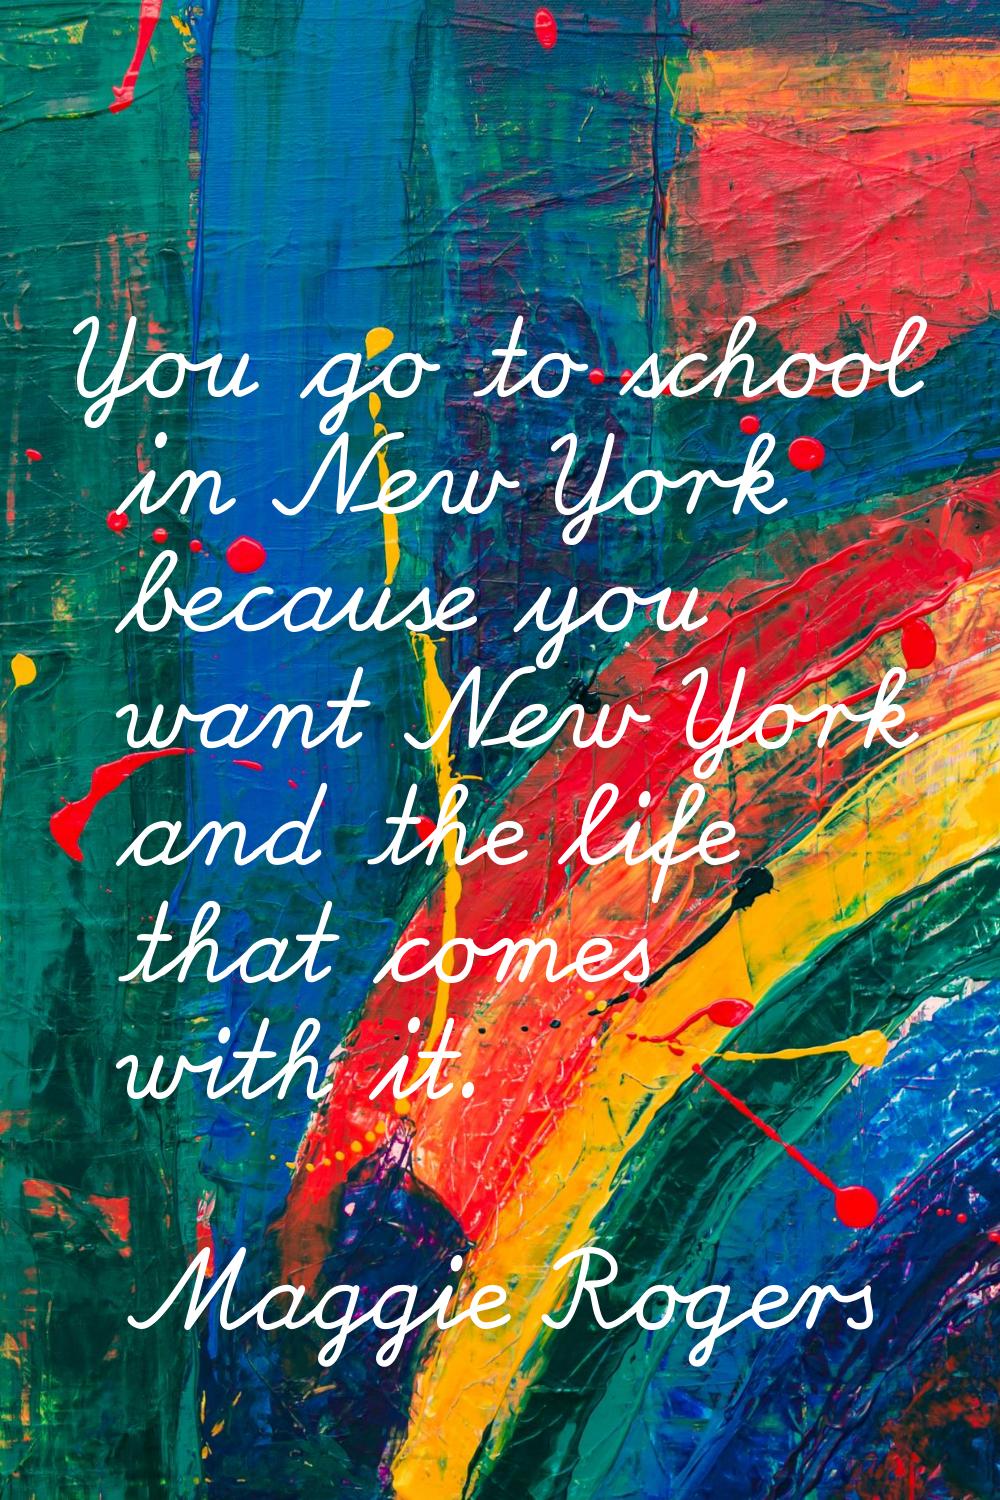 You go to school in New York because you want New York and the life that comes with it.